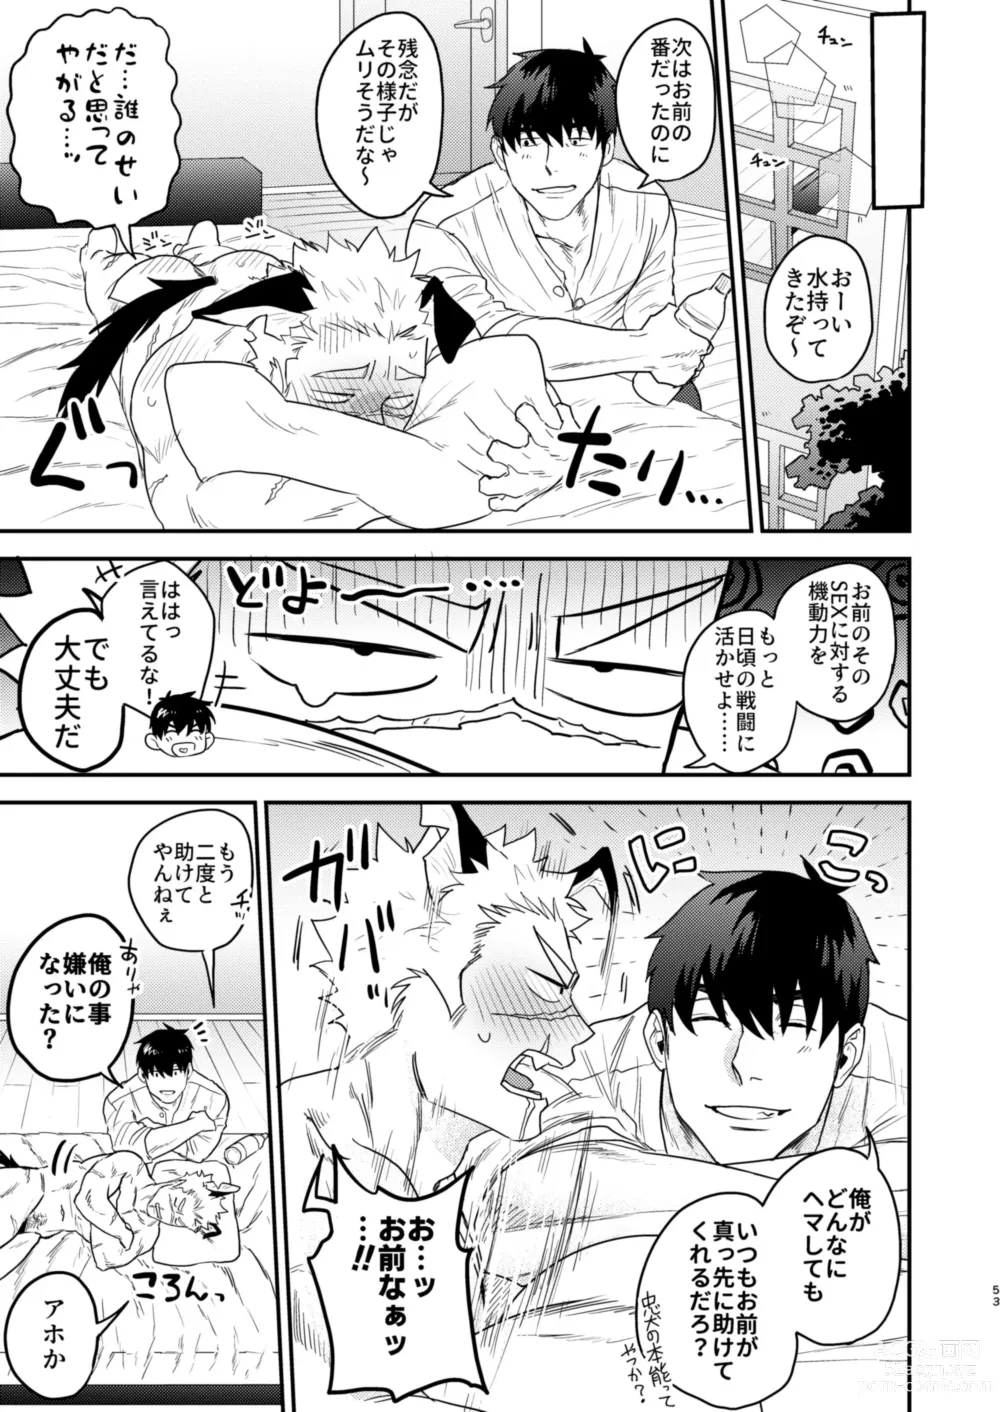 Page 50 of doujinshi It Looks like My Dog is in Heat